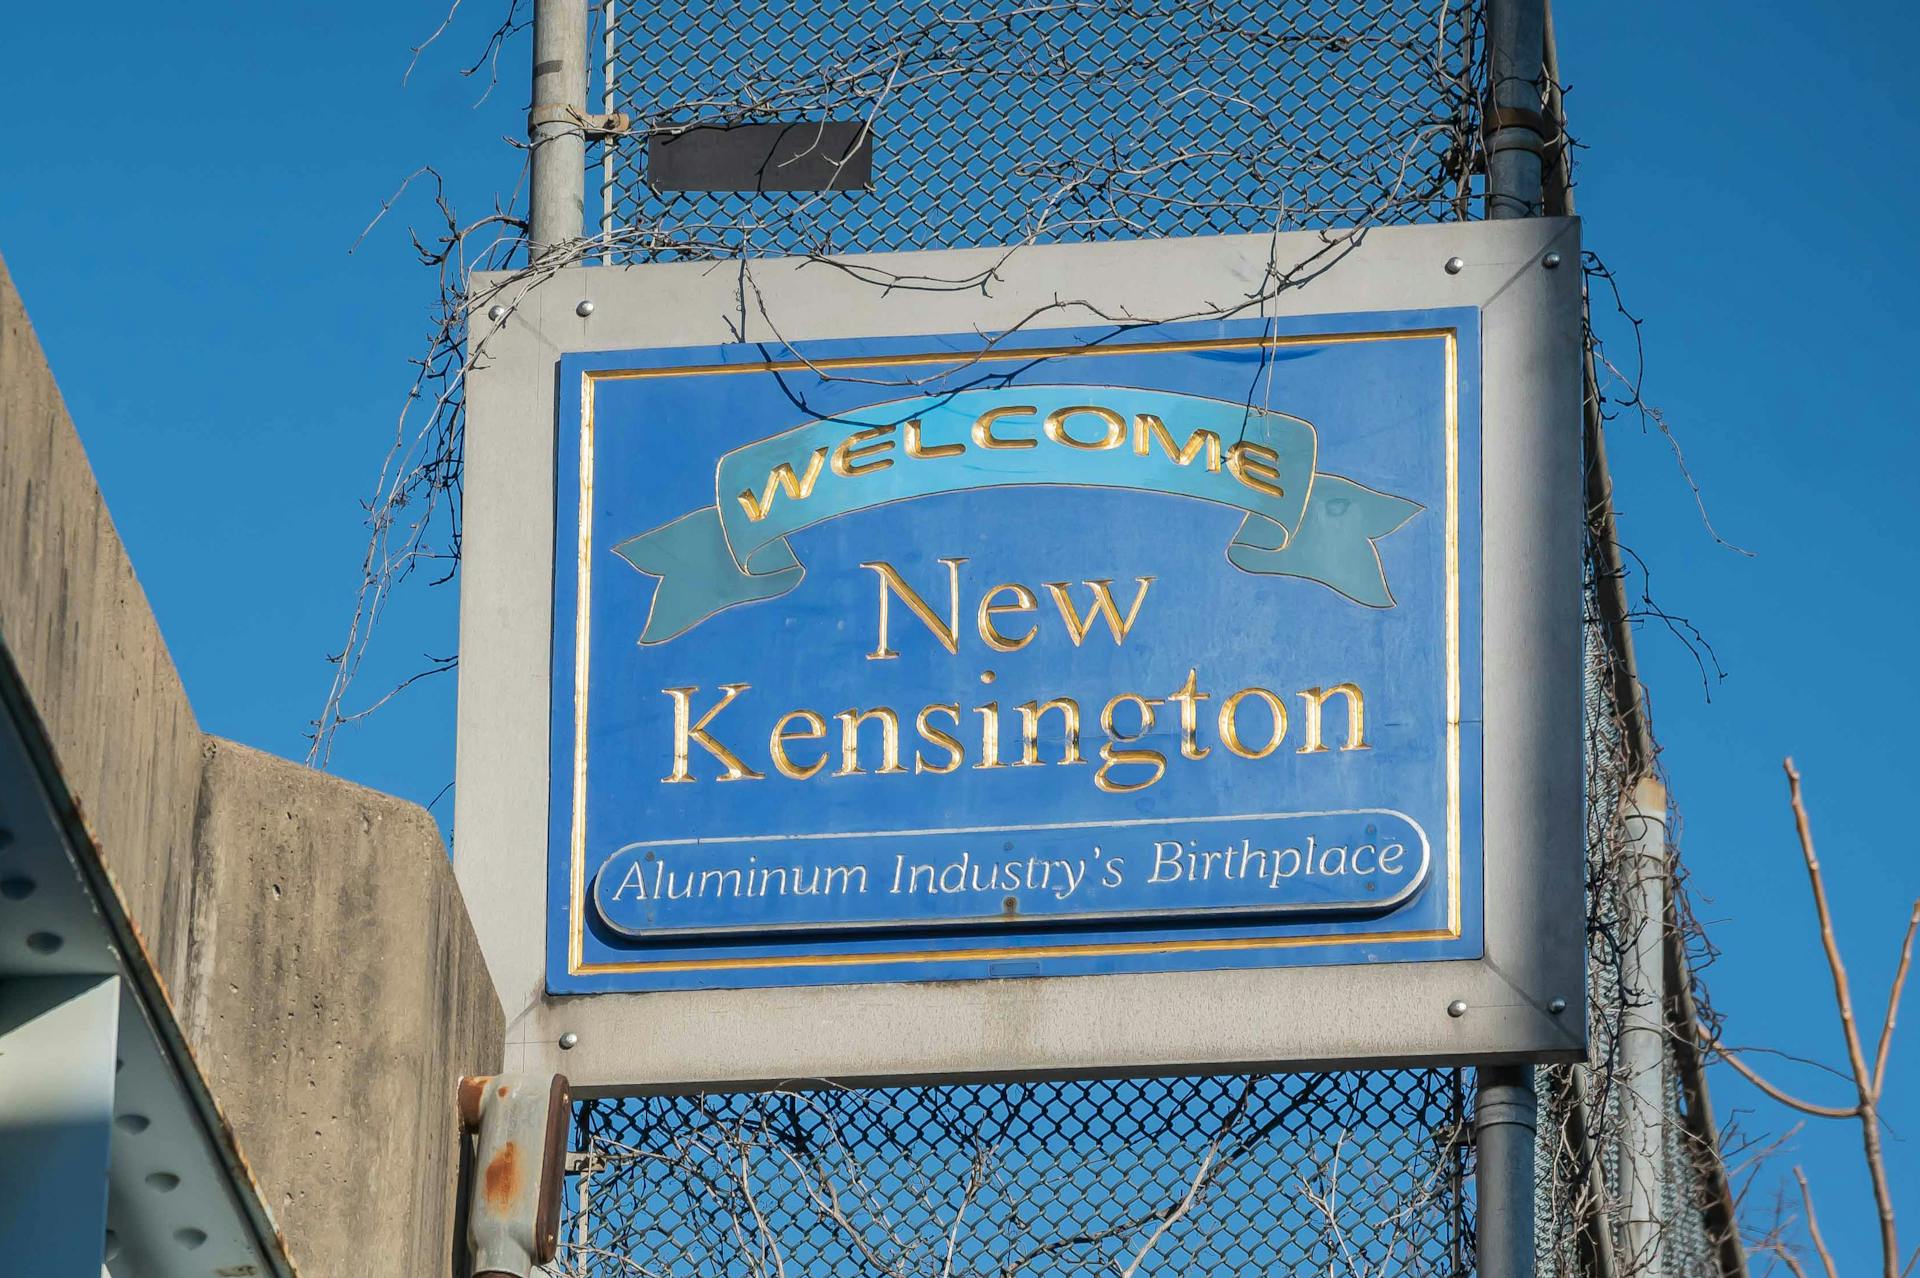 Sign of 'Welcome to New Kensington'